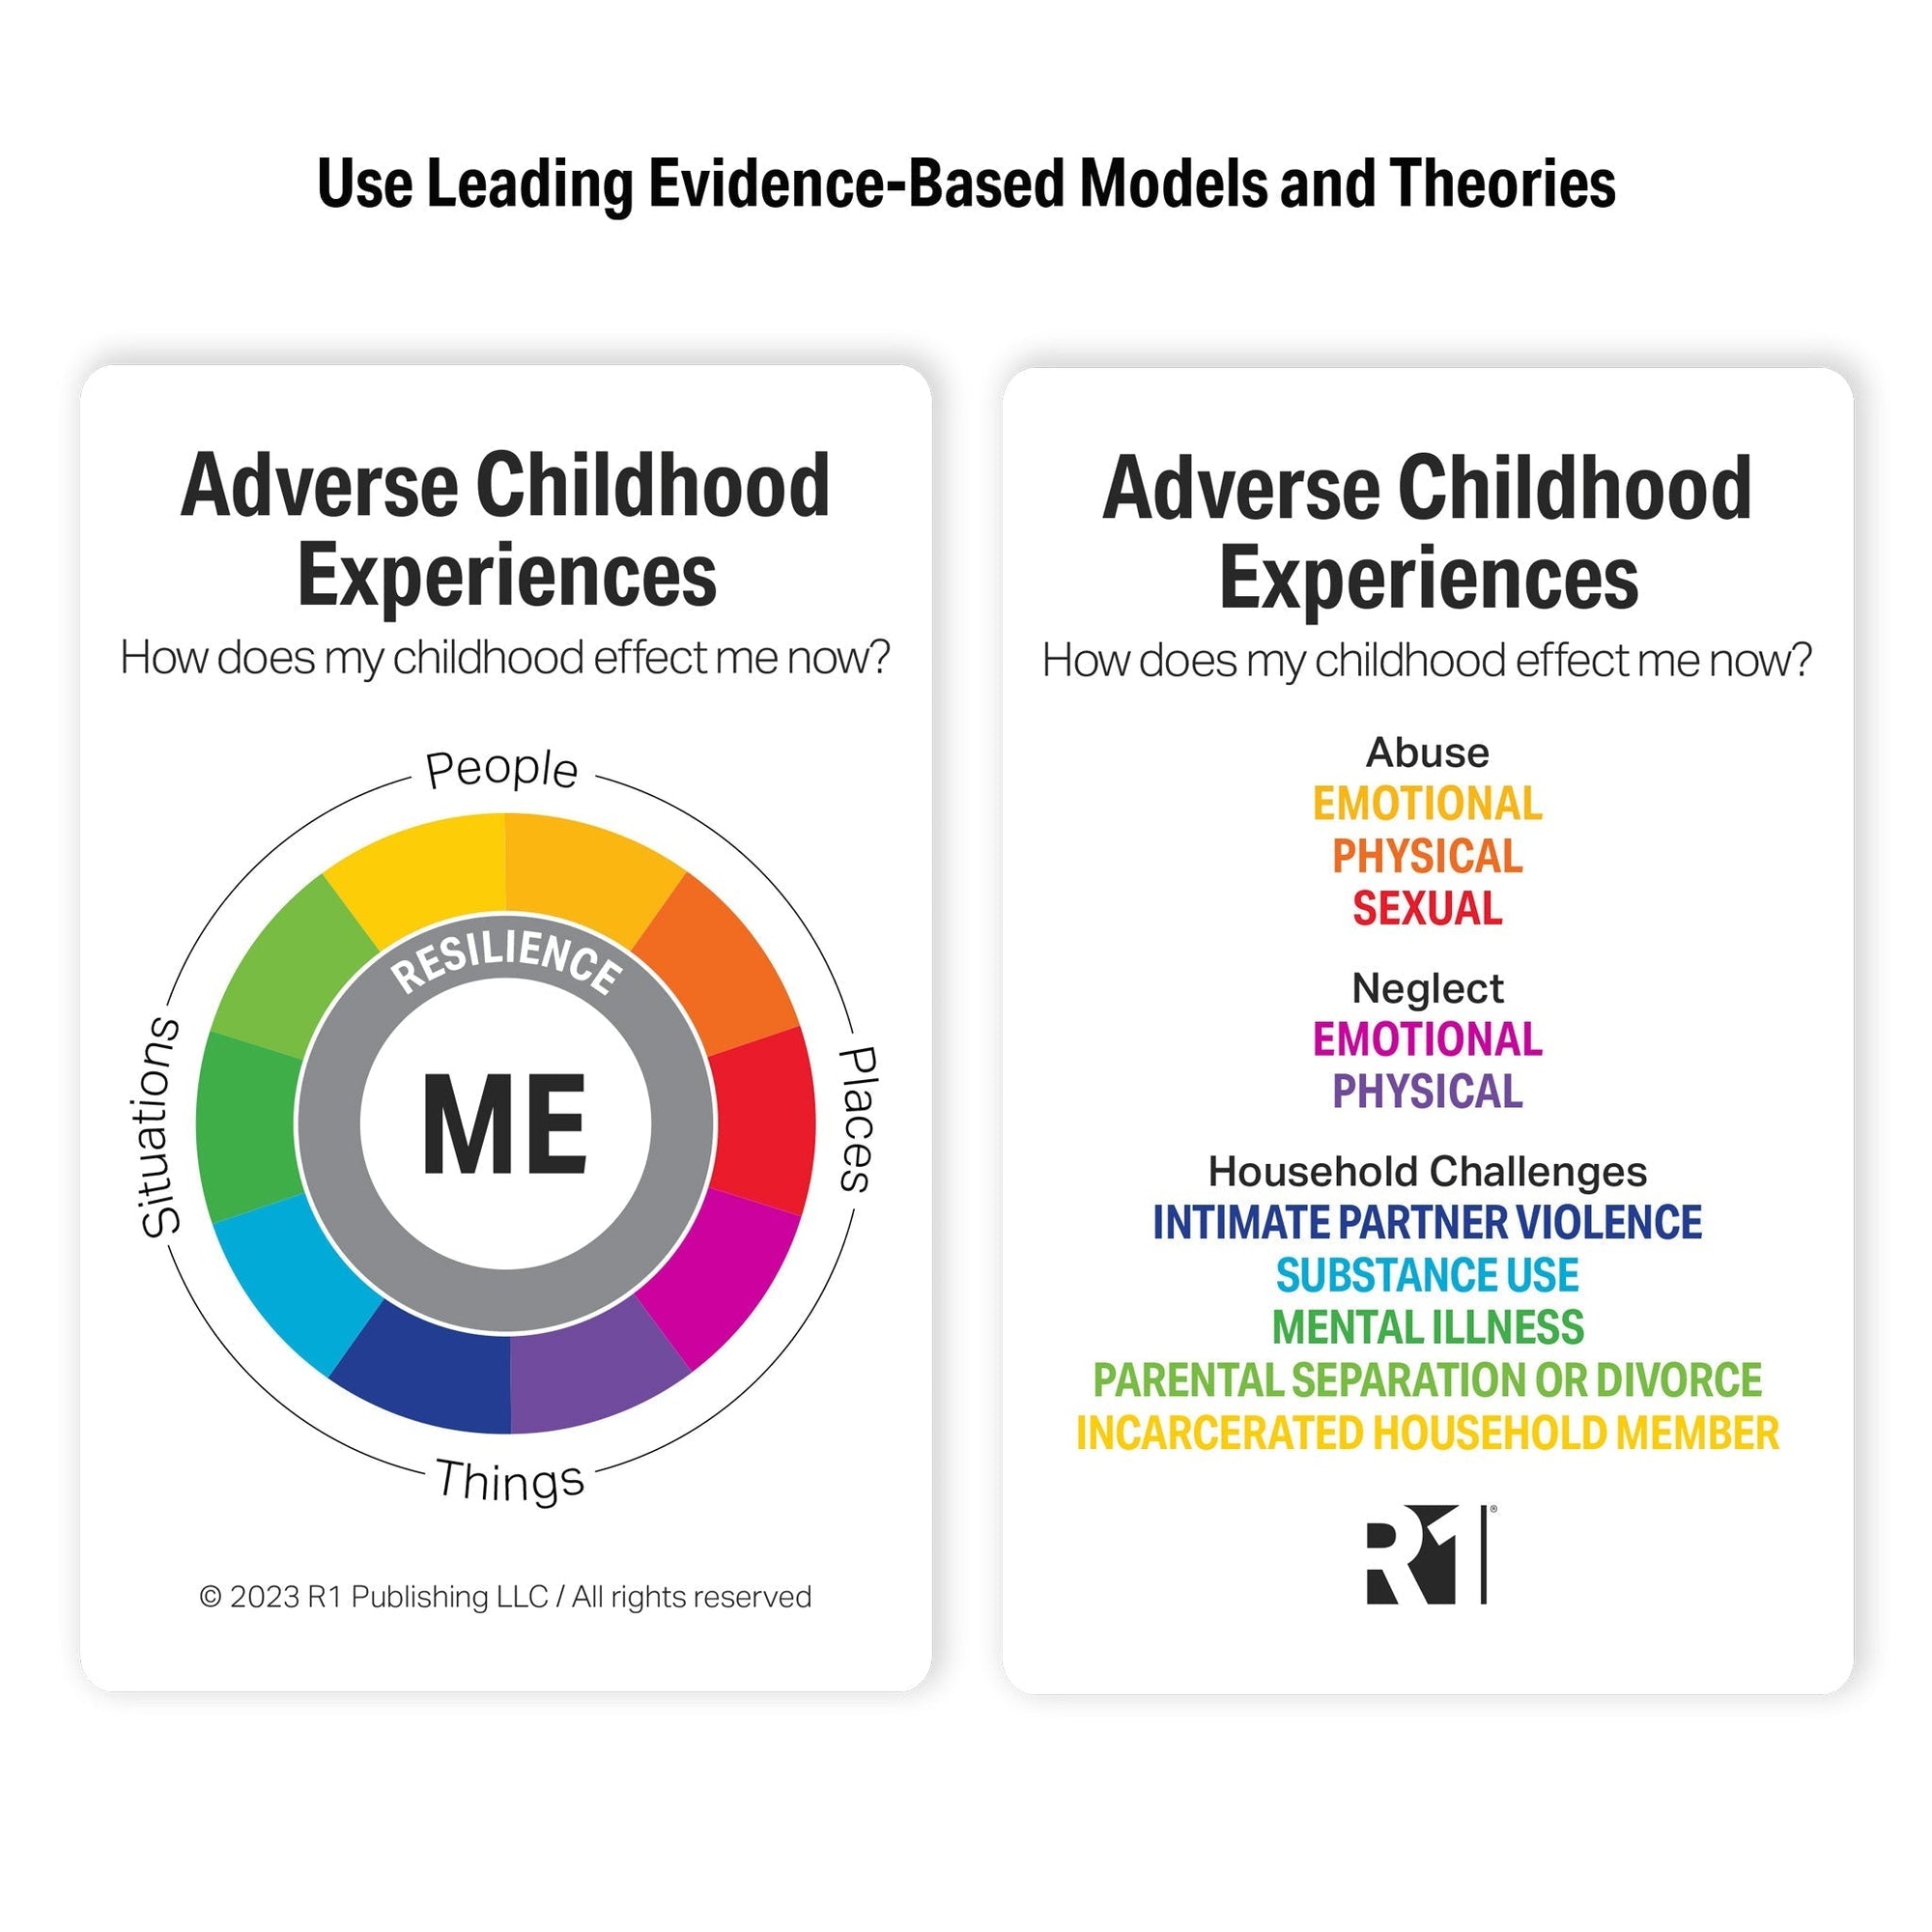 Adverse Childhood Experiences (ACEs) Facilitator Guide — 1 guide